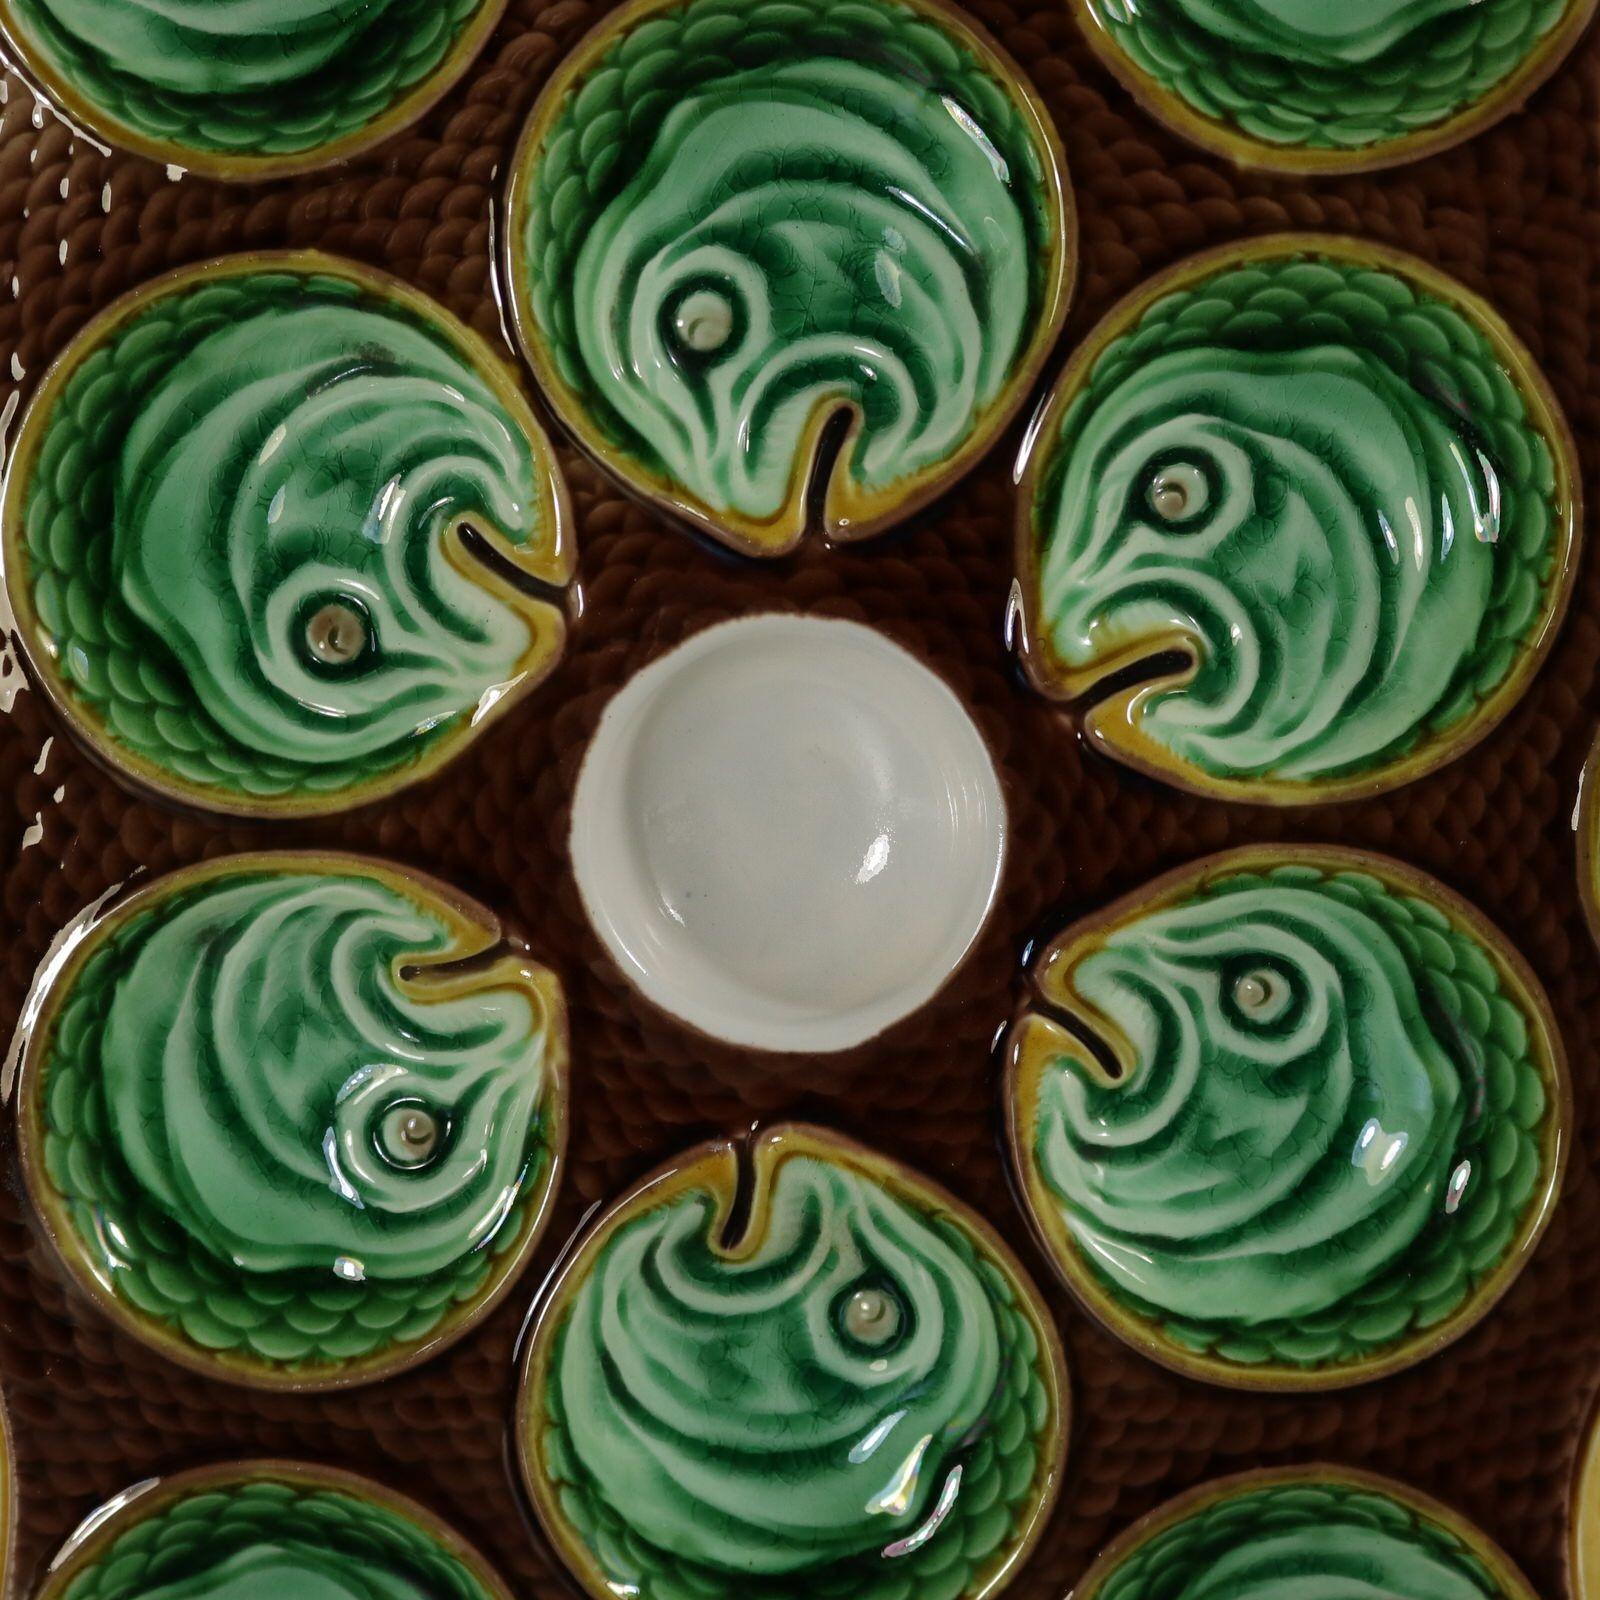 Wedgwood Majolica oyster plate which features twelve wells modelled as fish heads, surrounding a central white well. Brown ground molded as fish scales. Colouration: green, brown, yellow, are predominant. The piece bears maker's marks for the